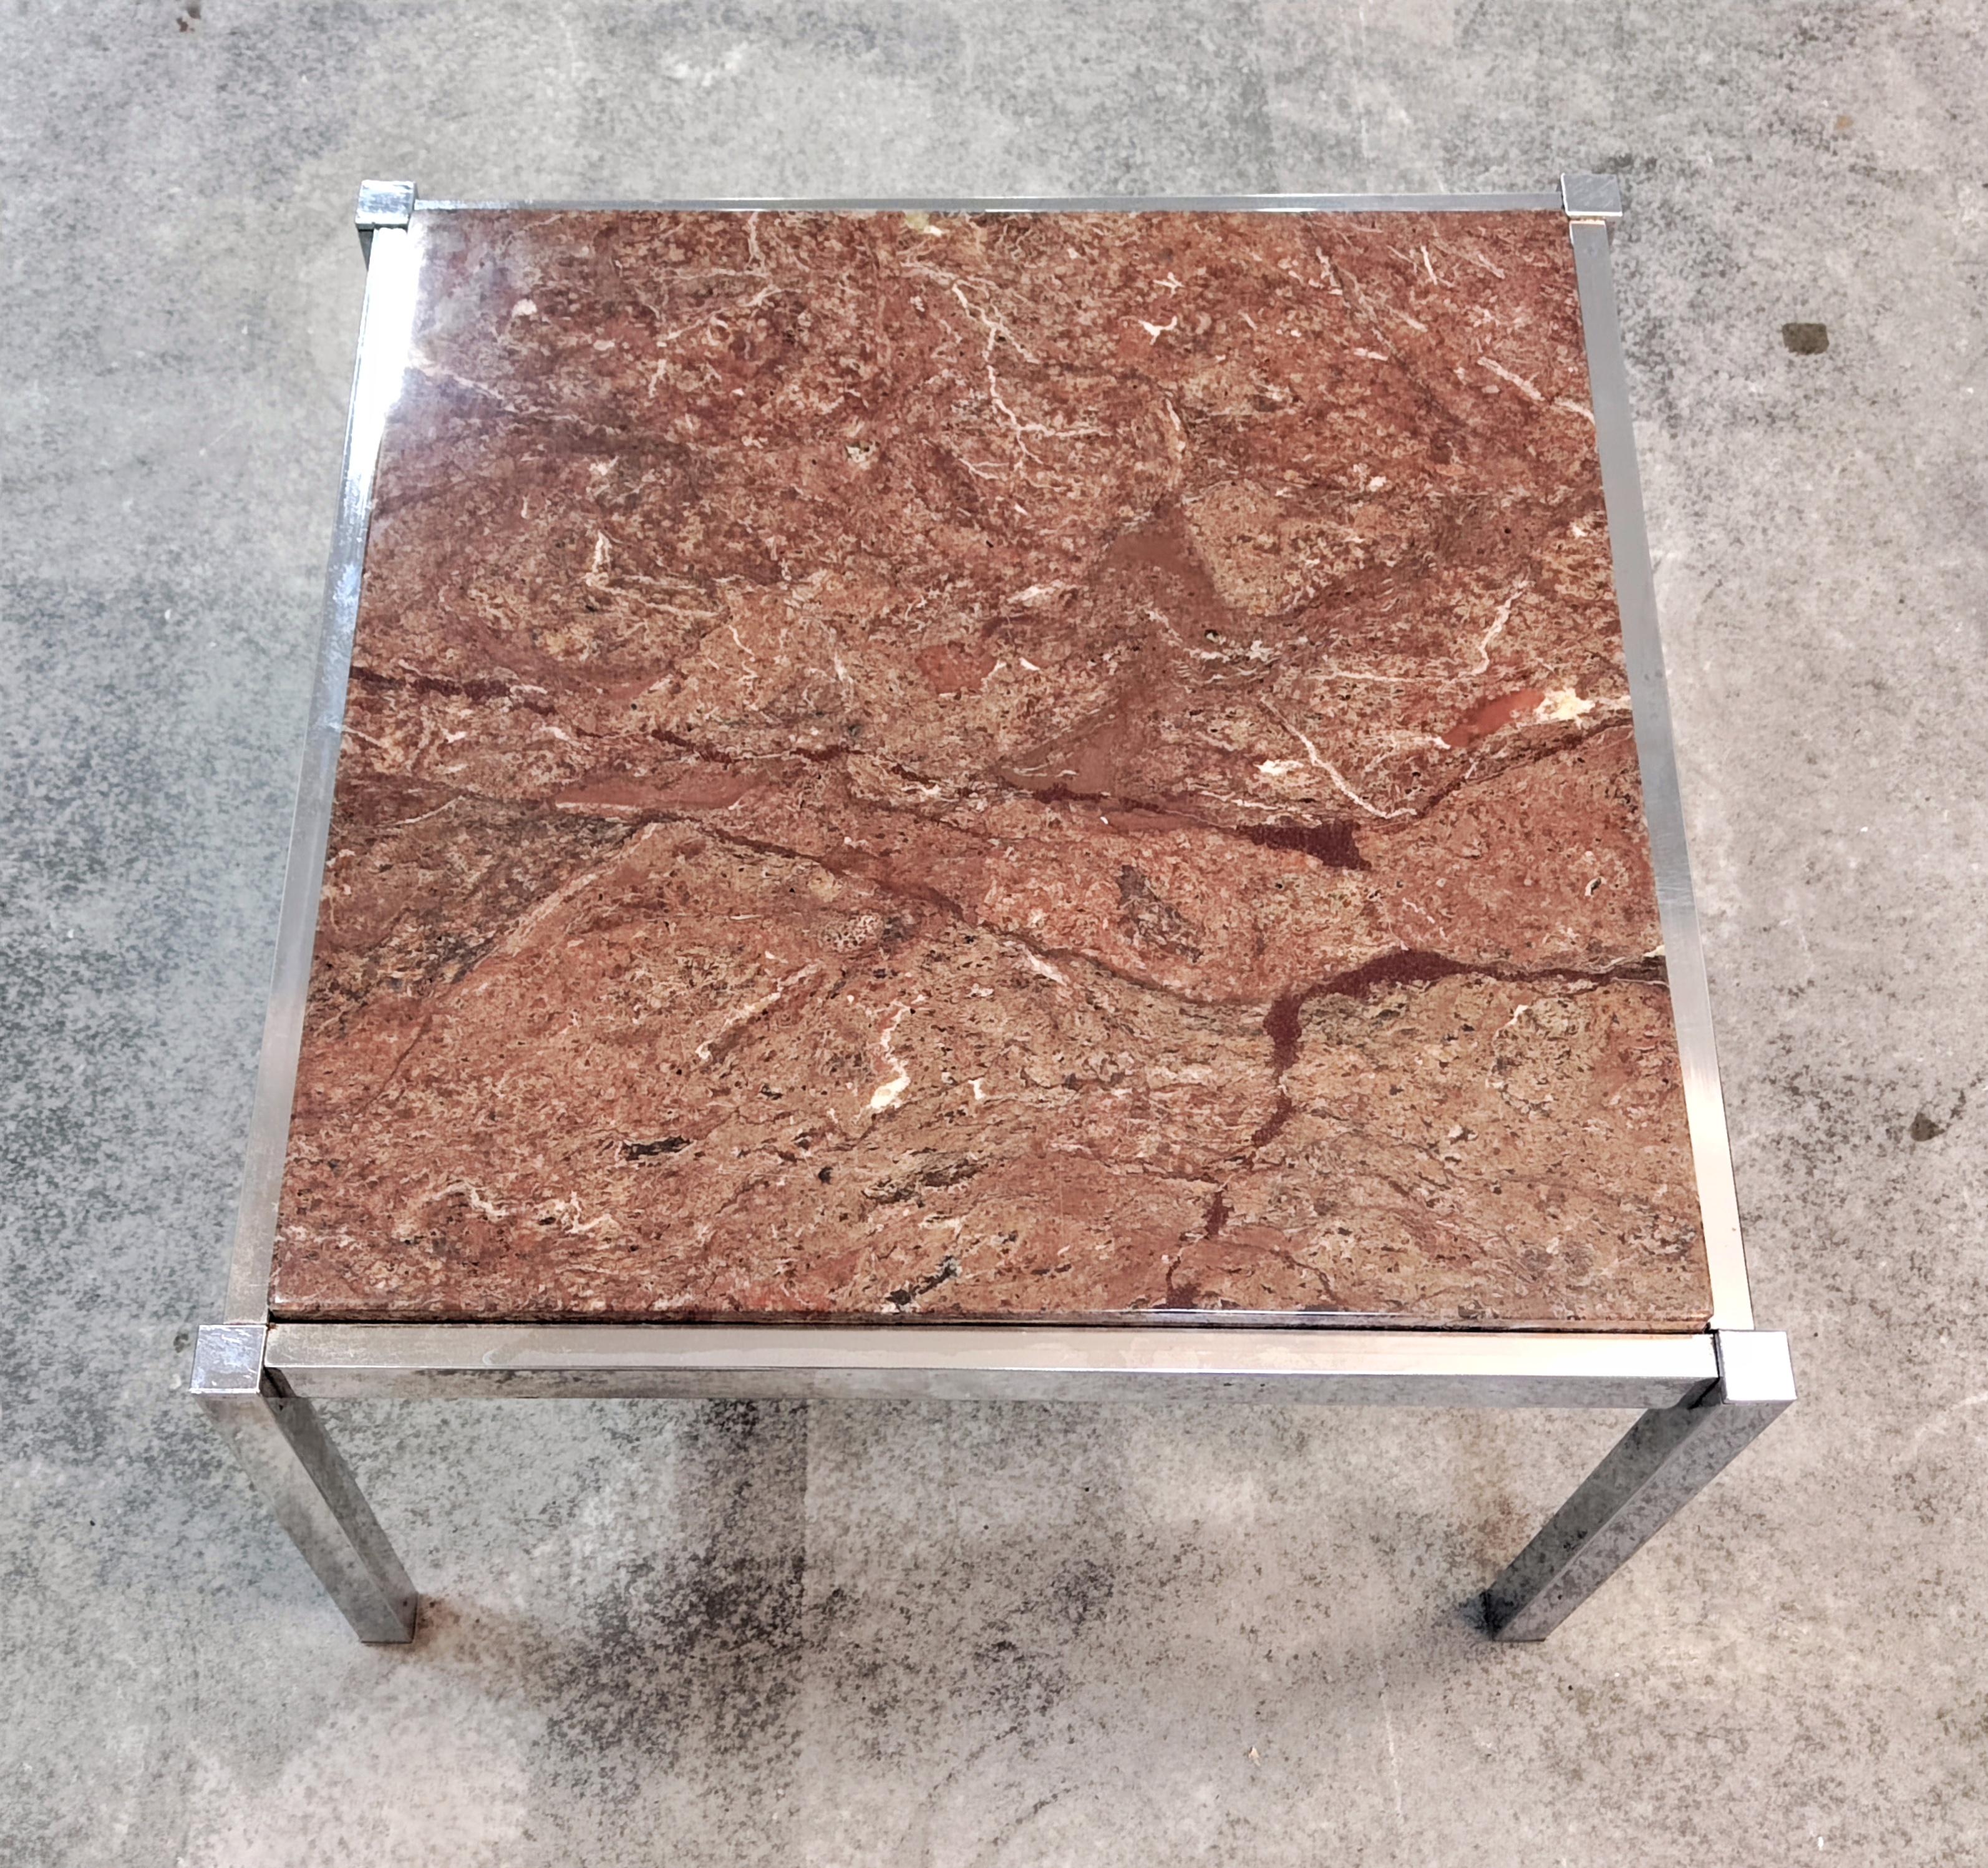 Chrome and Persa Granite Coffee Table, Florence Knoll Style, Italy 1970s 1